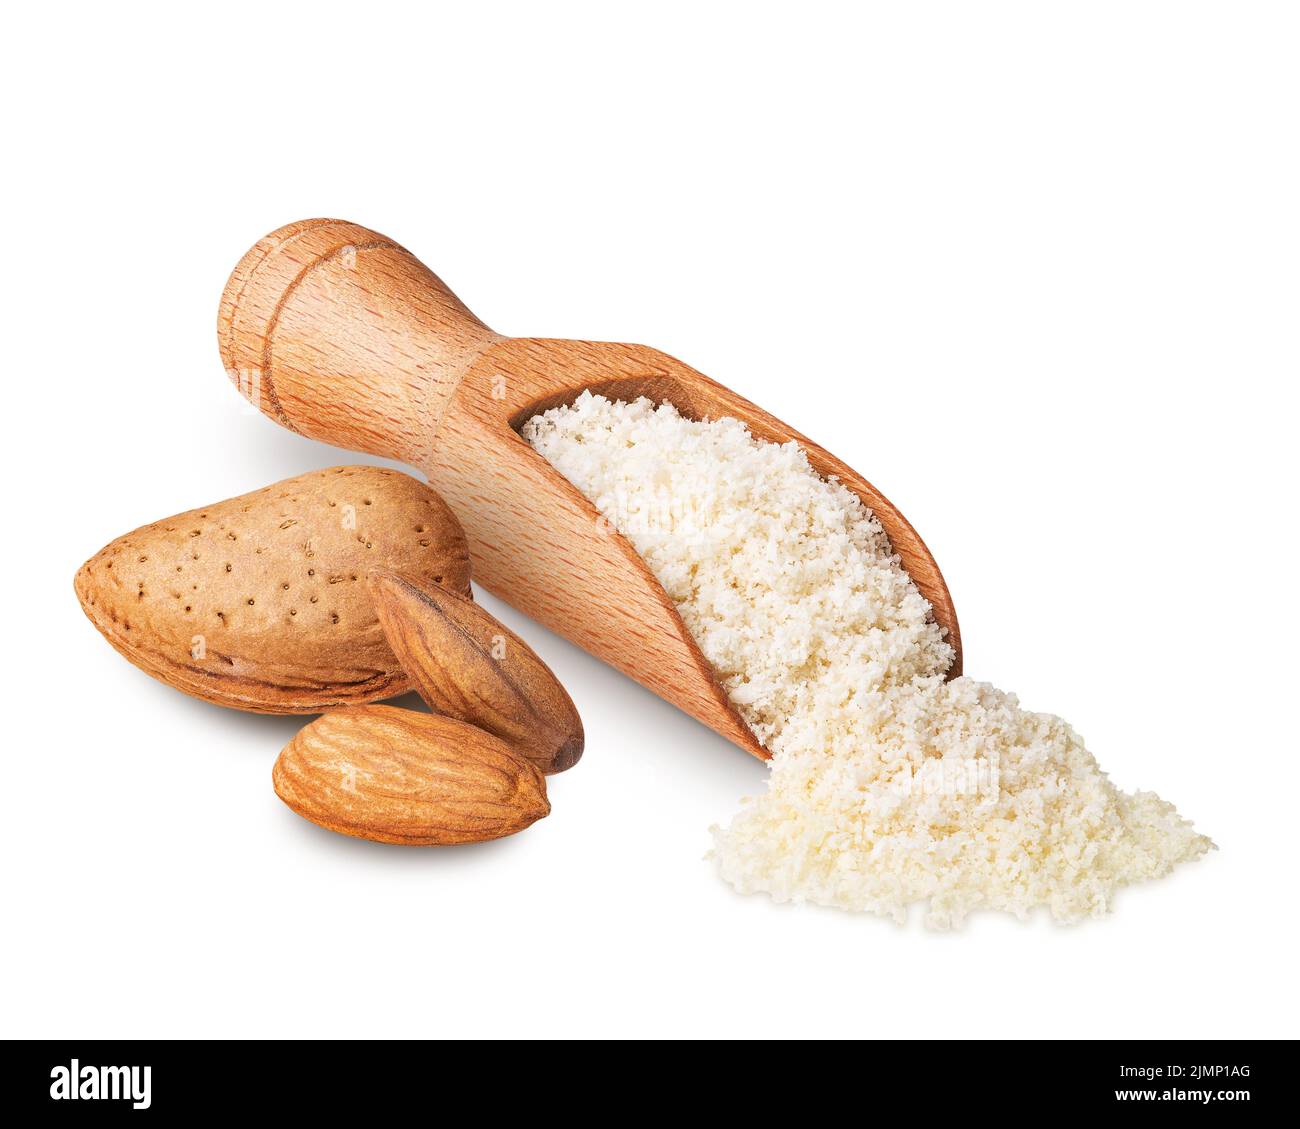 Wooden scoop full of almond flour isolated on white. Deep focus Stock Photo